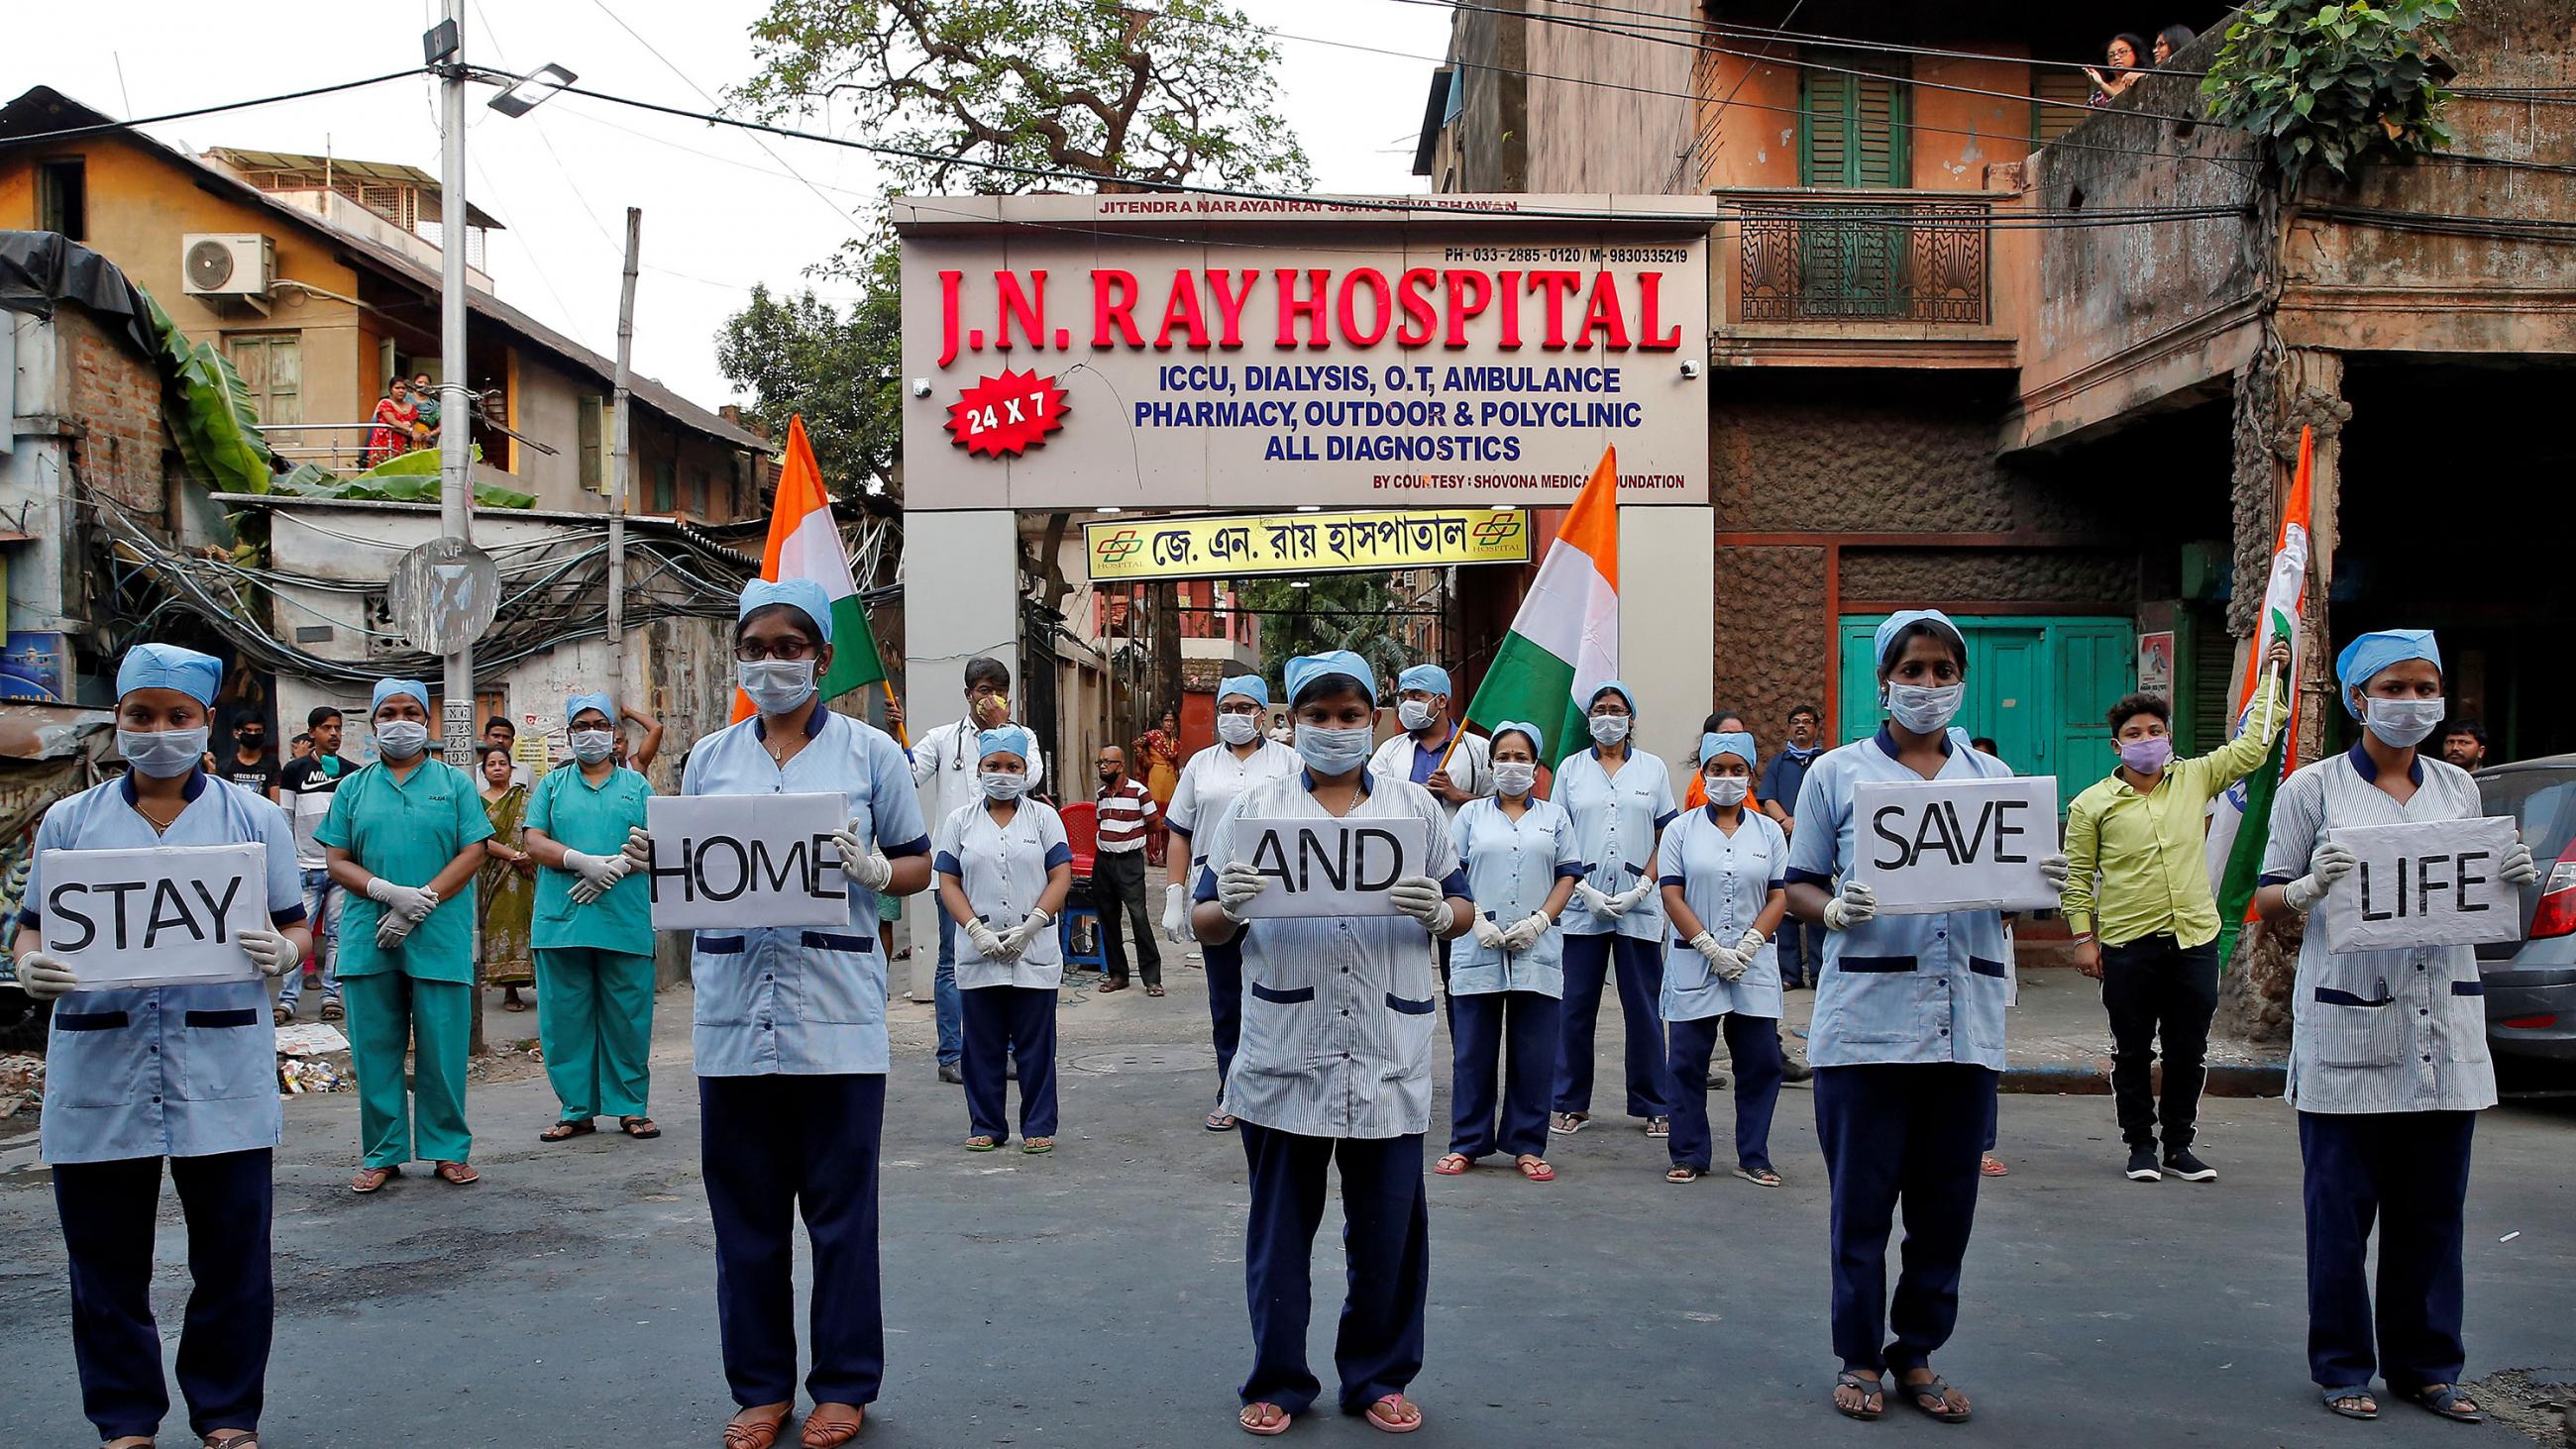  The photo shows the medical staff standing in front of the health center holding placards. 